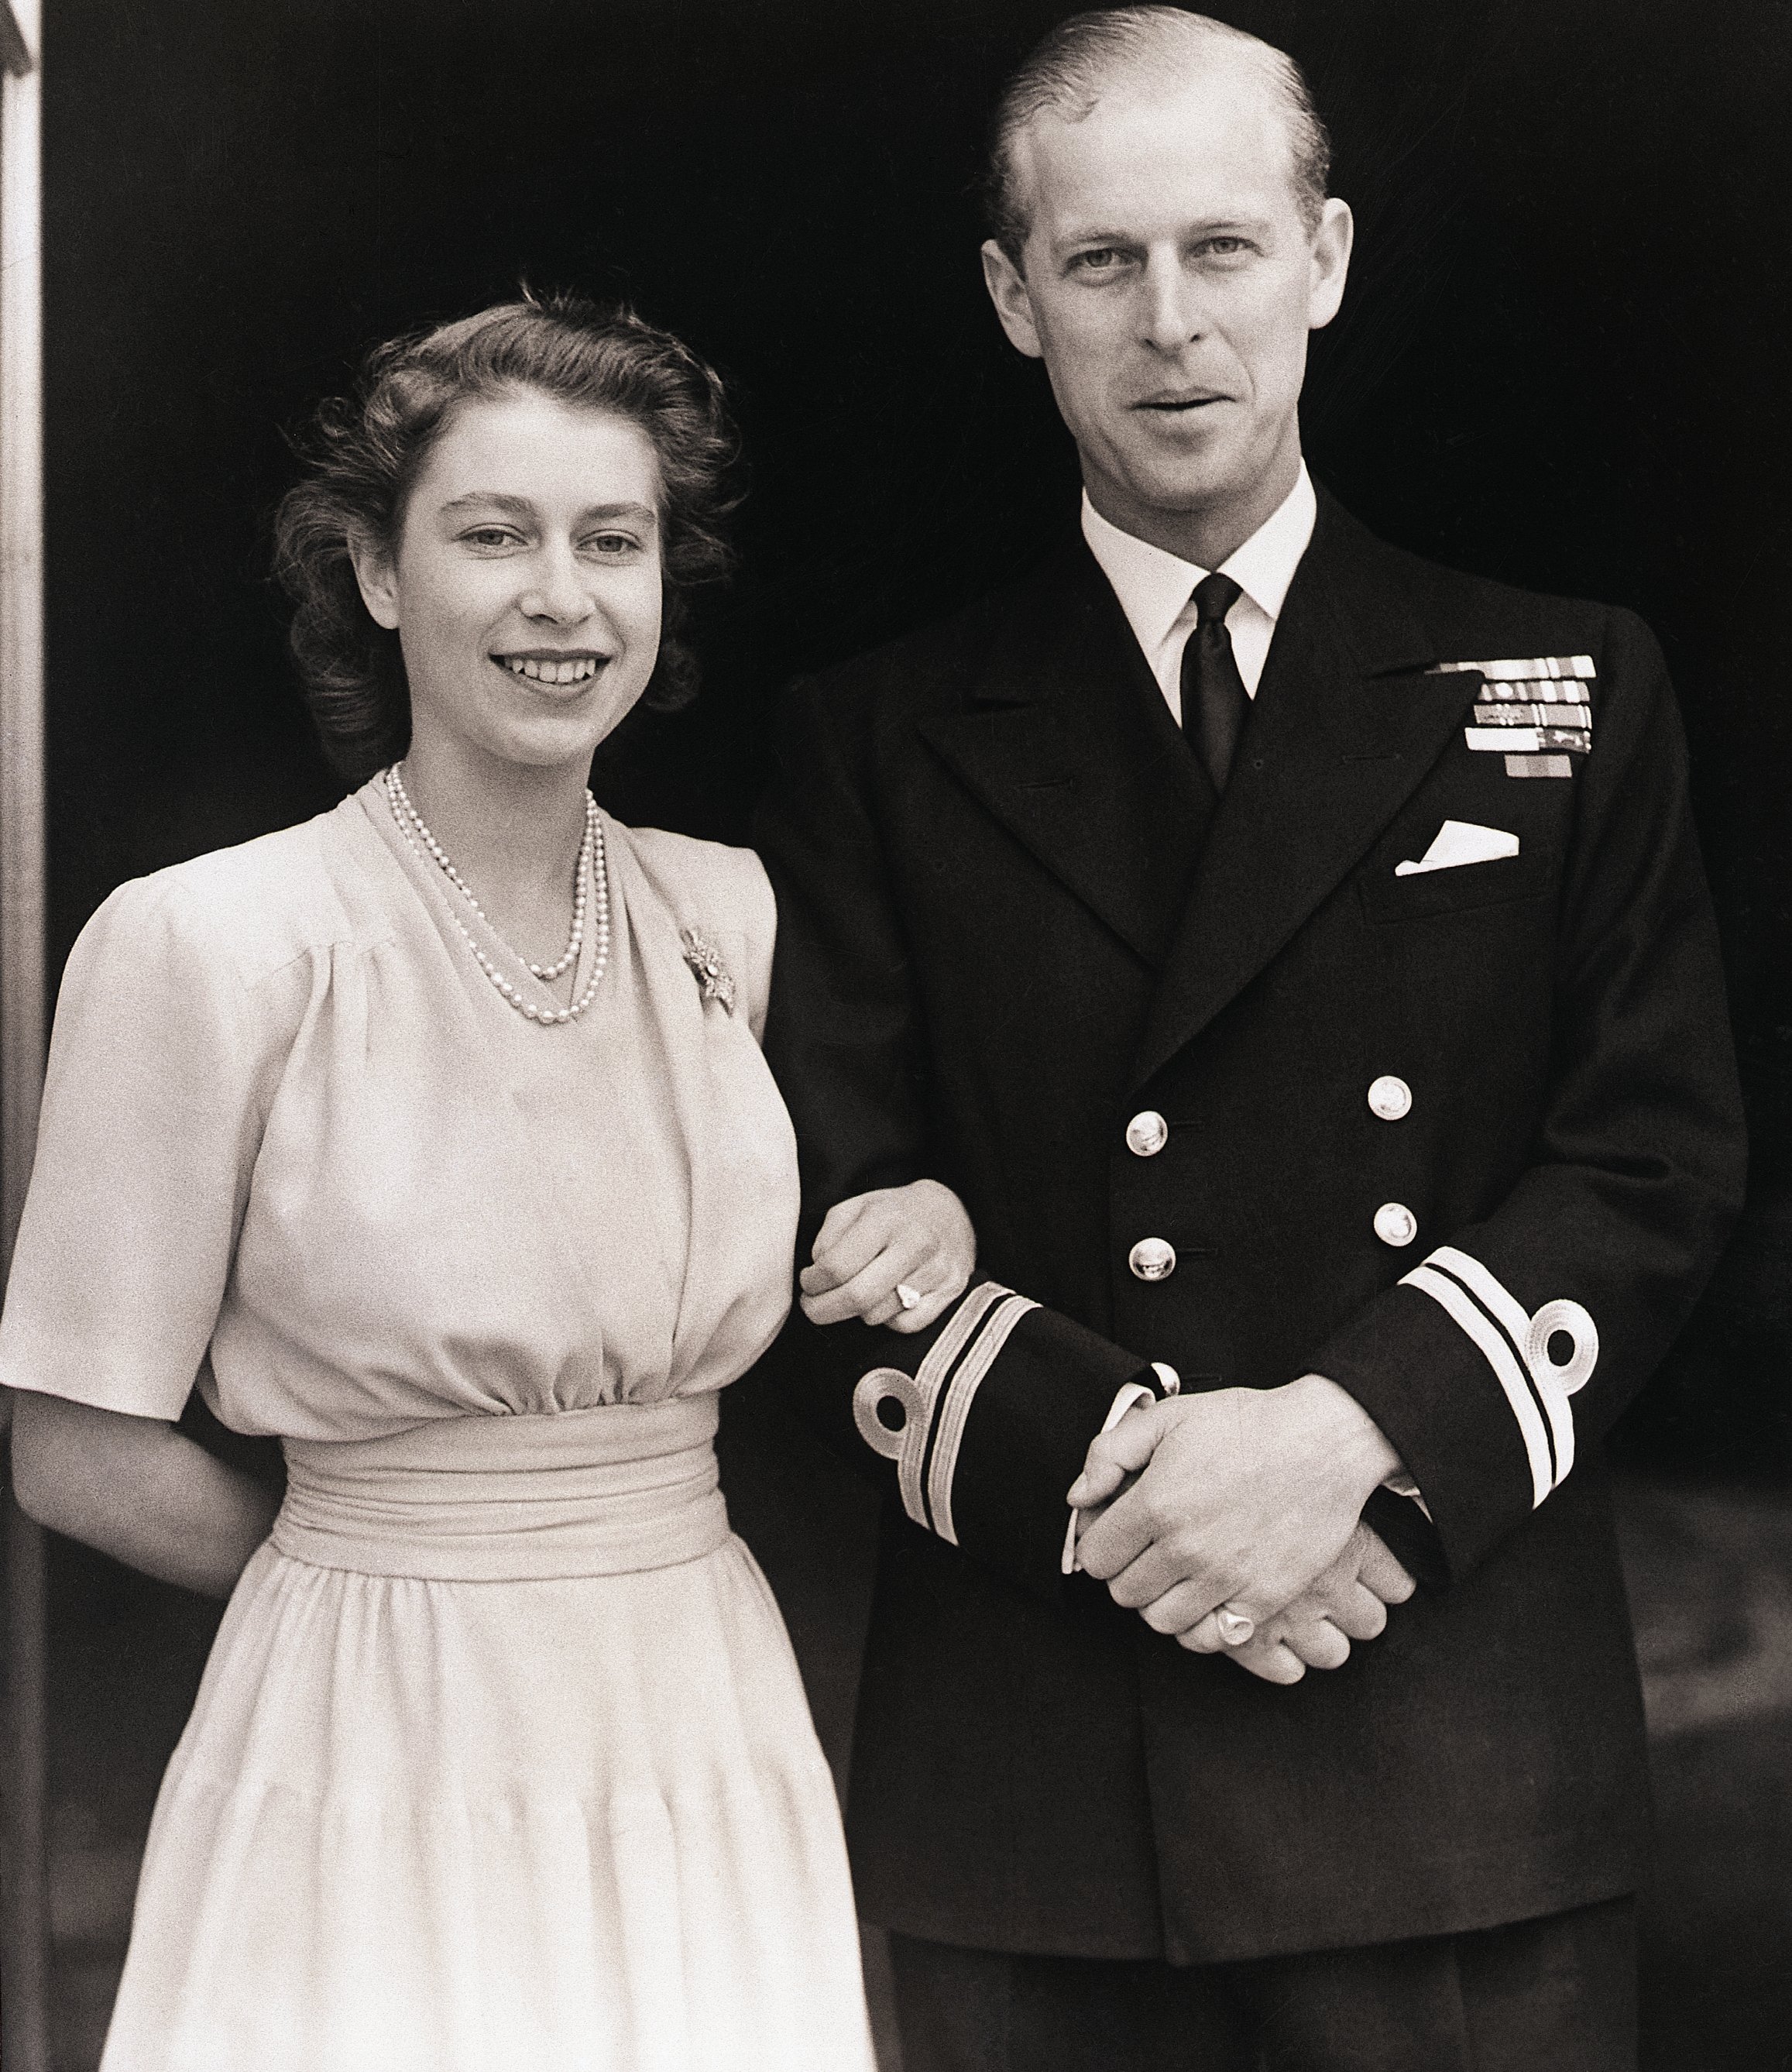 Queen Elizabeth II and Prince Philip shown at Buckingham Palace. The Princess wears a three-diamond ring on her engagement finger, symbolic of her betrothal. | Source: Getty Images